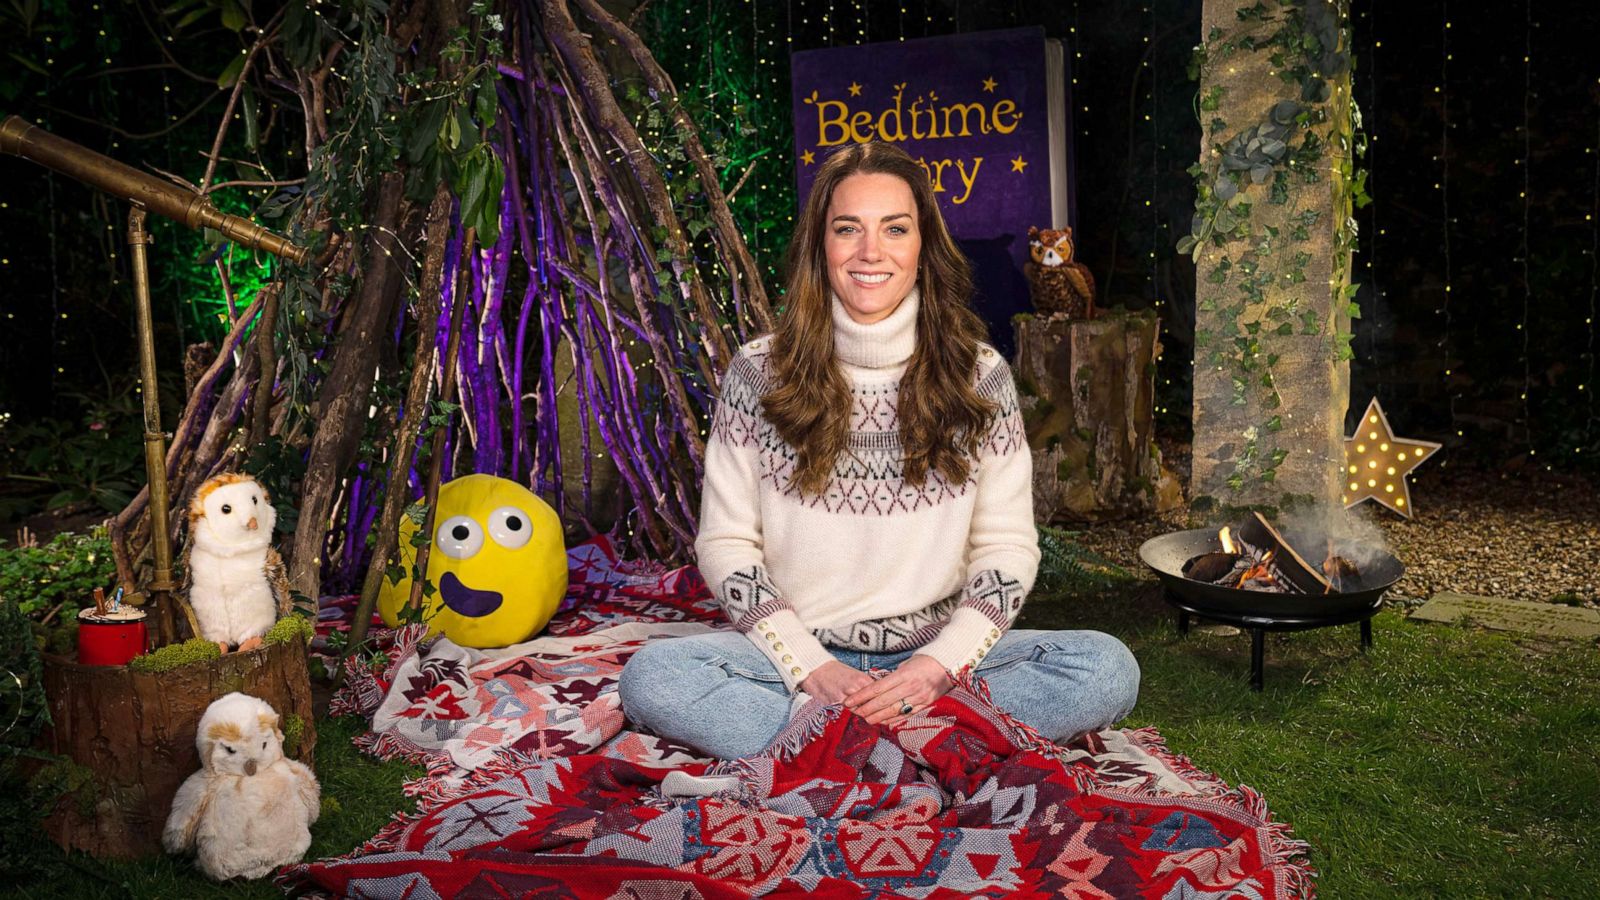 Get a 1st look at Duchess Kate's CBeebies 'Bedtime Story' appearance - ABC  News